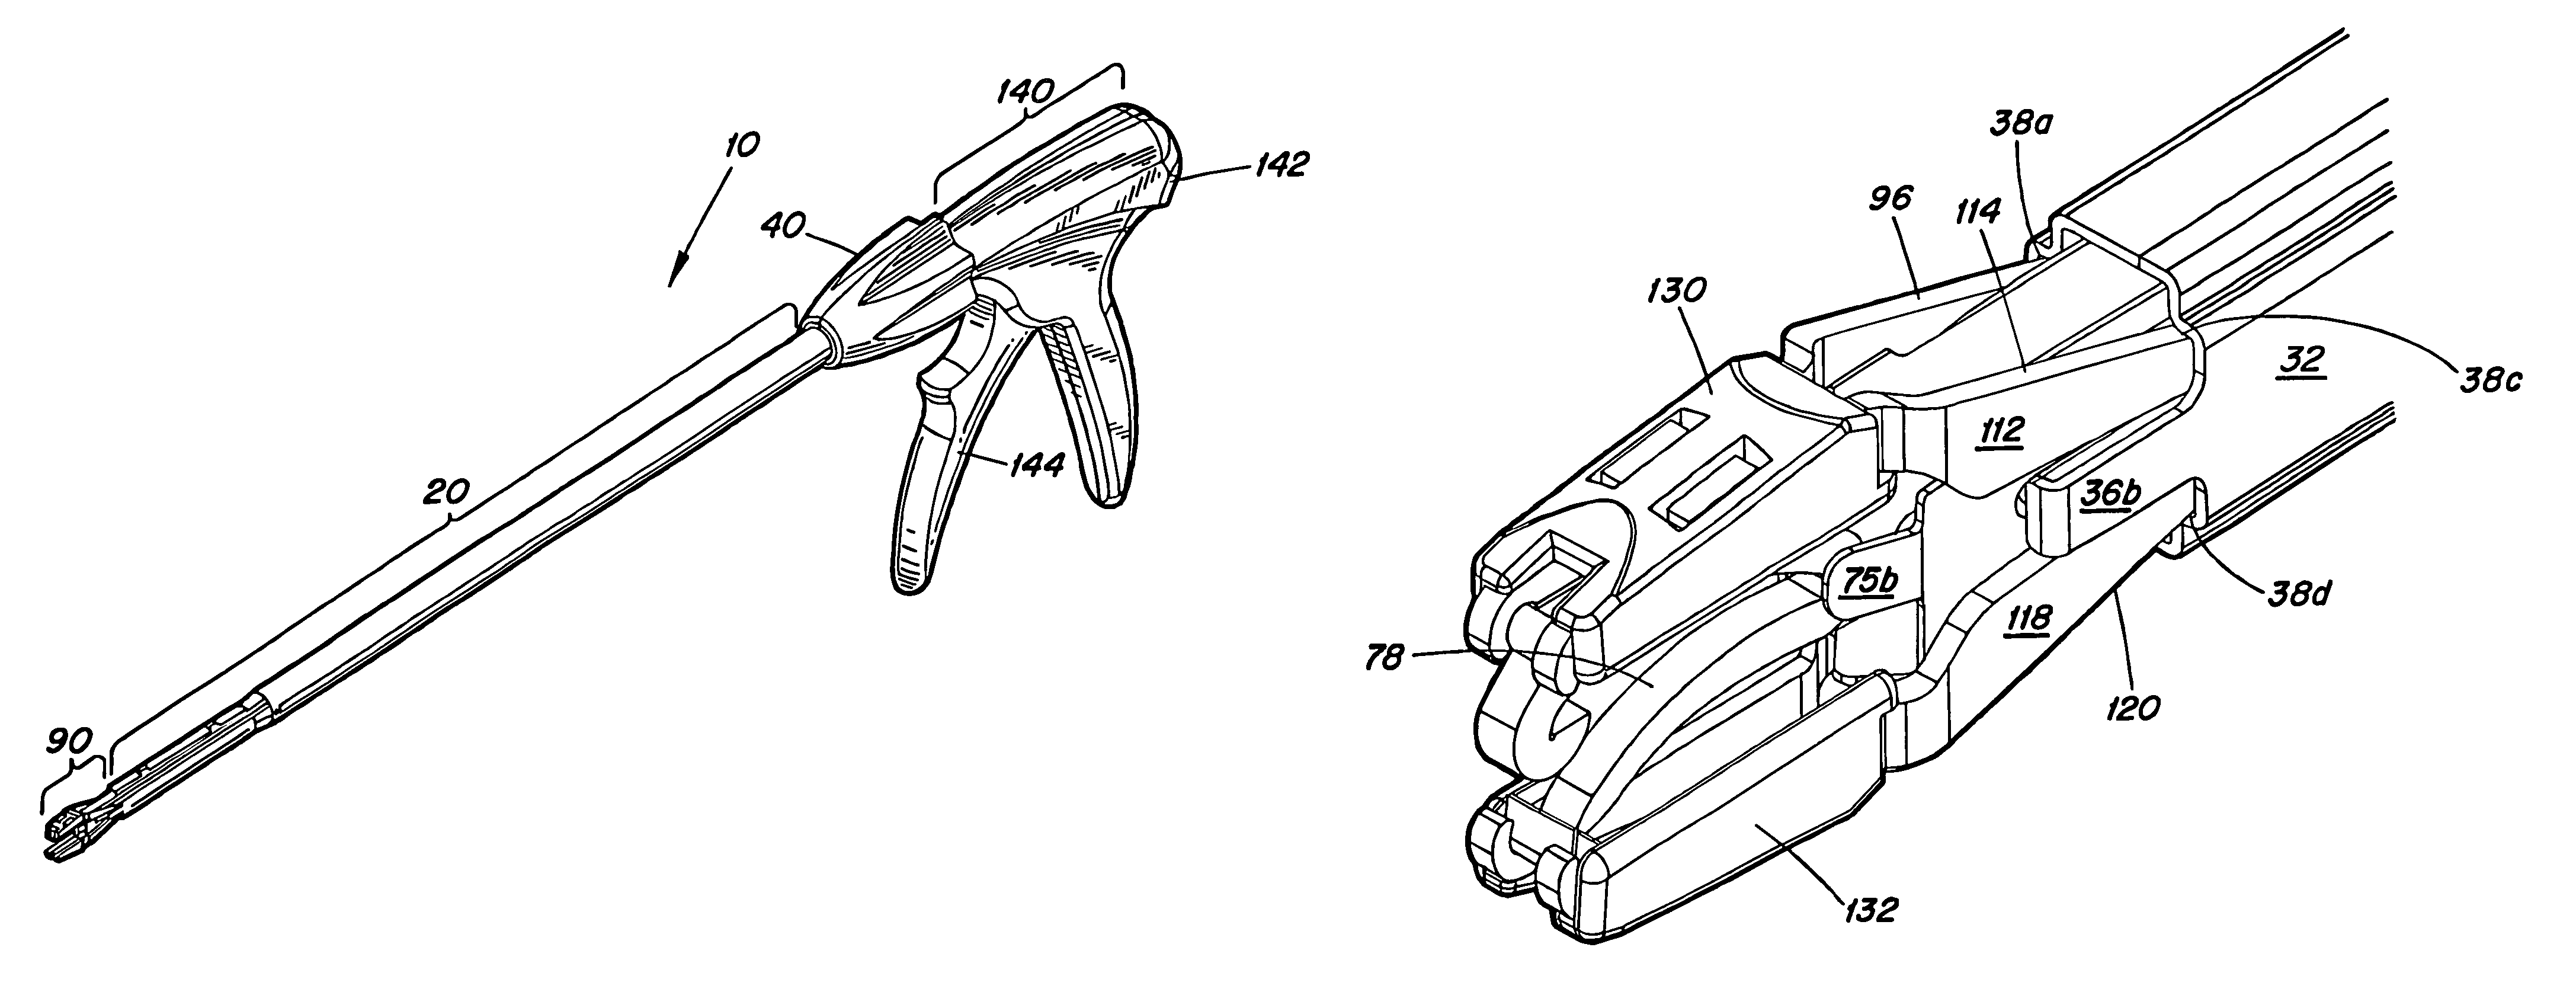 Endoscopic clip applying apparatus with improved aperture for clip release and related method